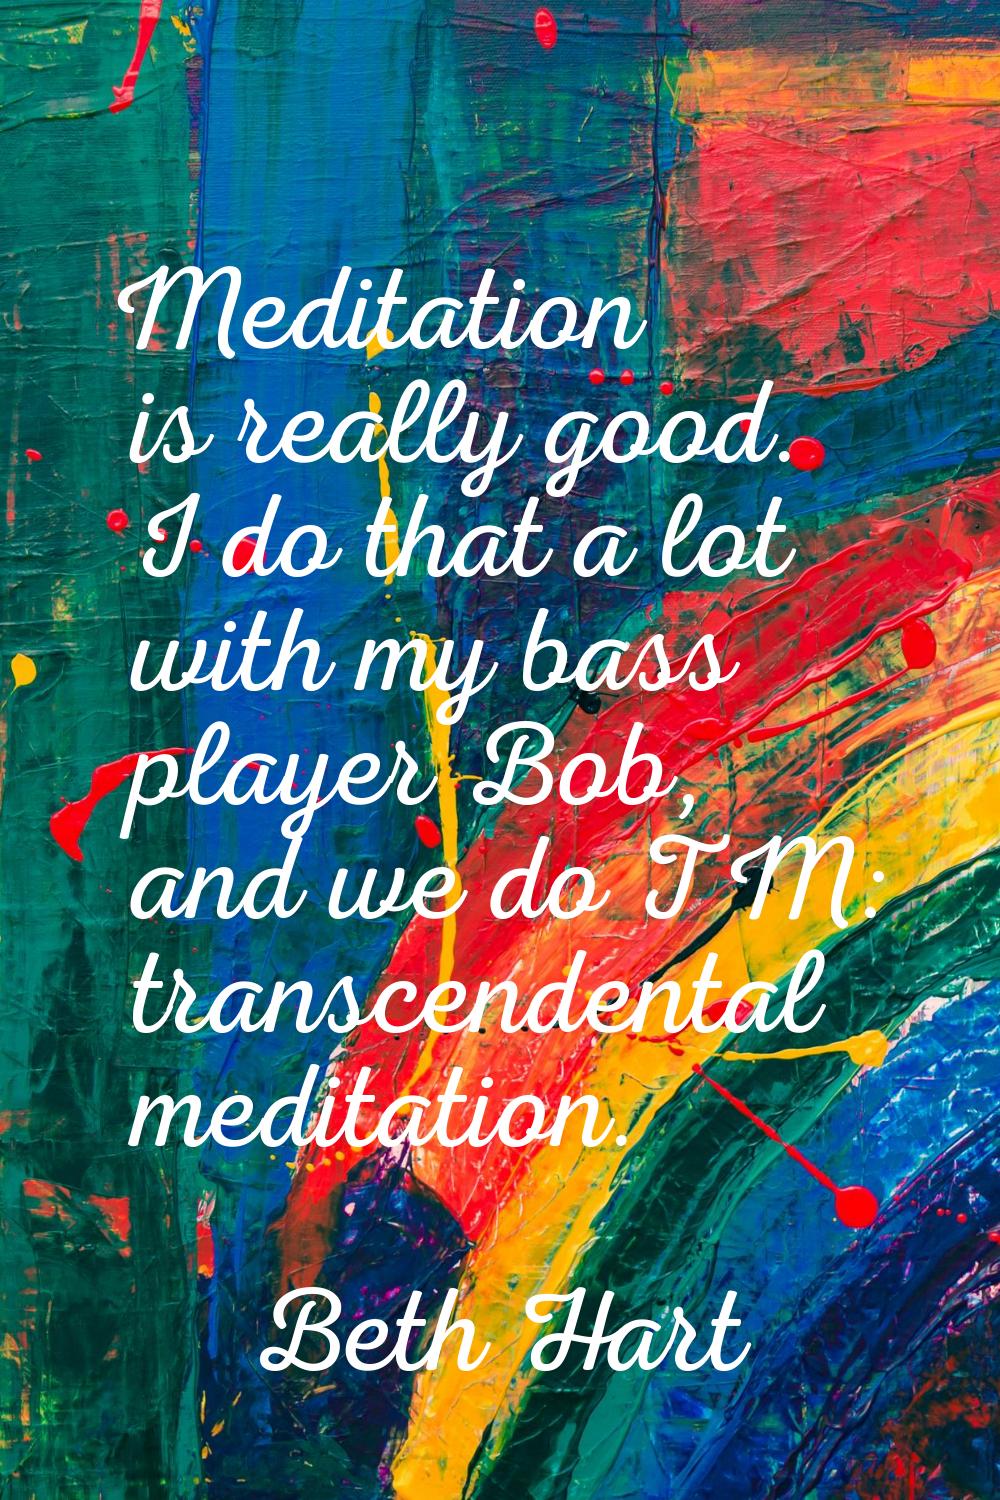 Meditation is really good. I do that a lot with my bass player Bob, and we do TM: transcendental me